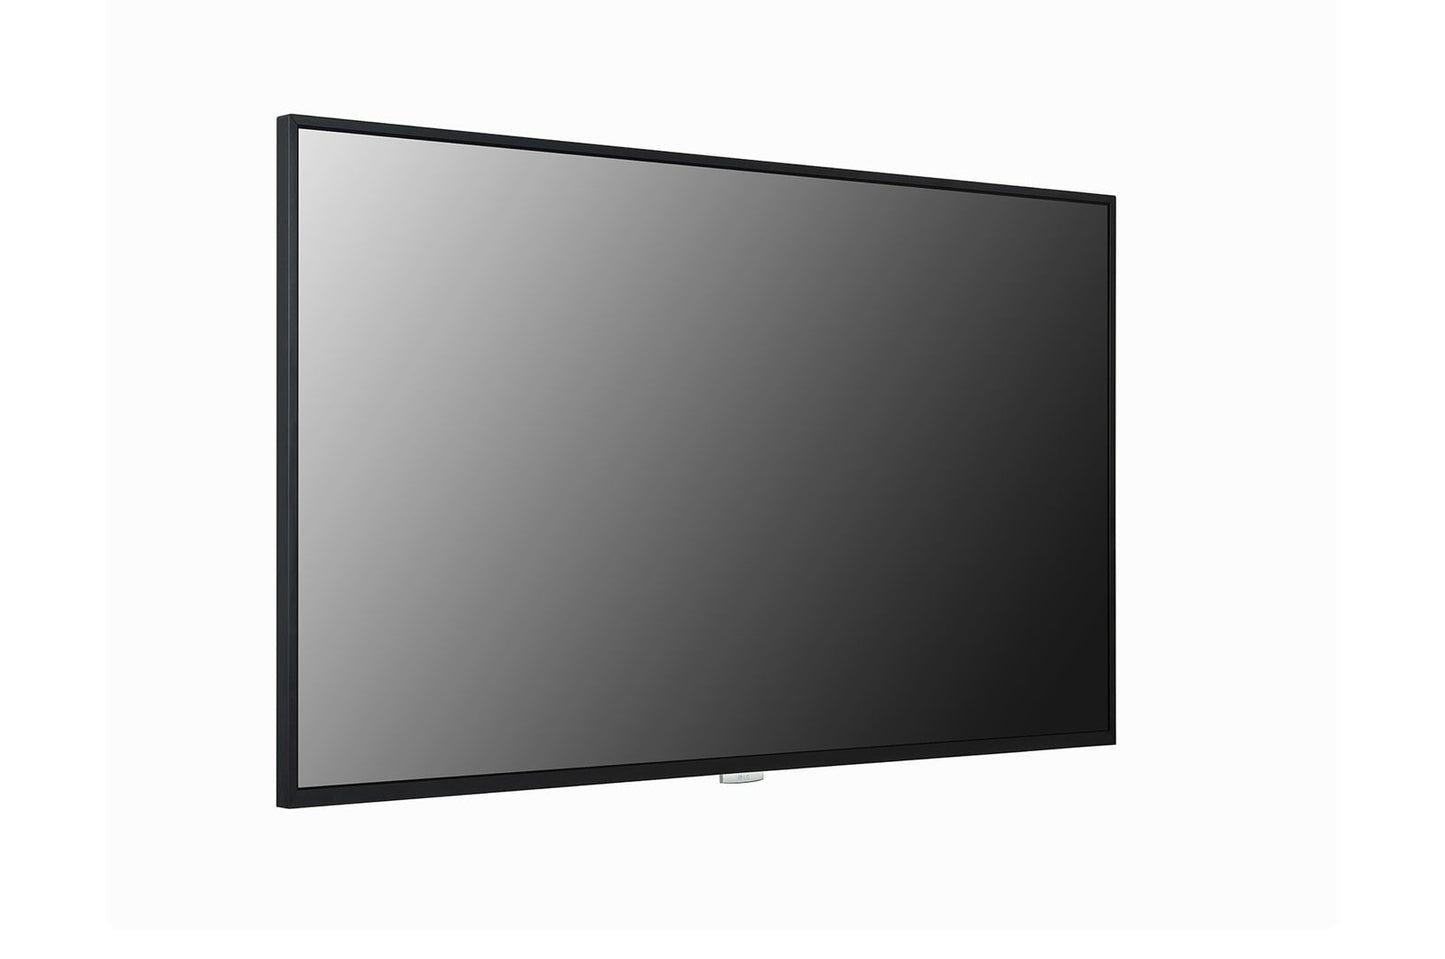 MONITOR LG PARA STAND ALONE 24/7 HORAS SERIE 43UH5J 43", 3840 X 2160 (UHD), IPS, 100-240V - SMART BUSINESS